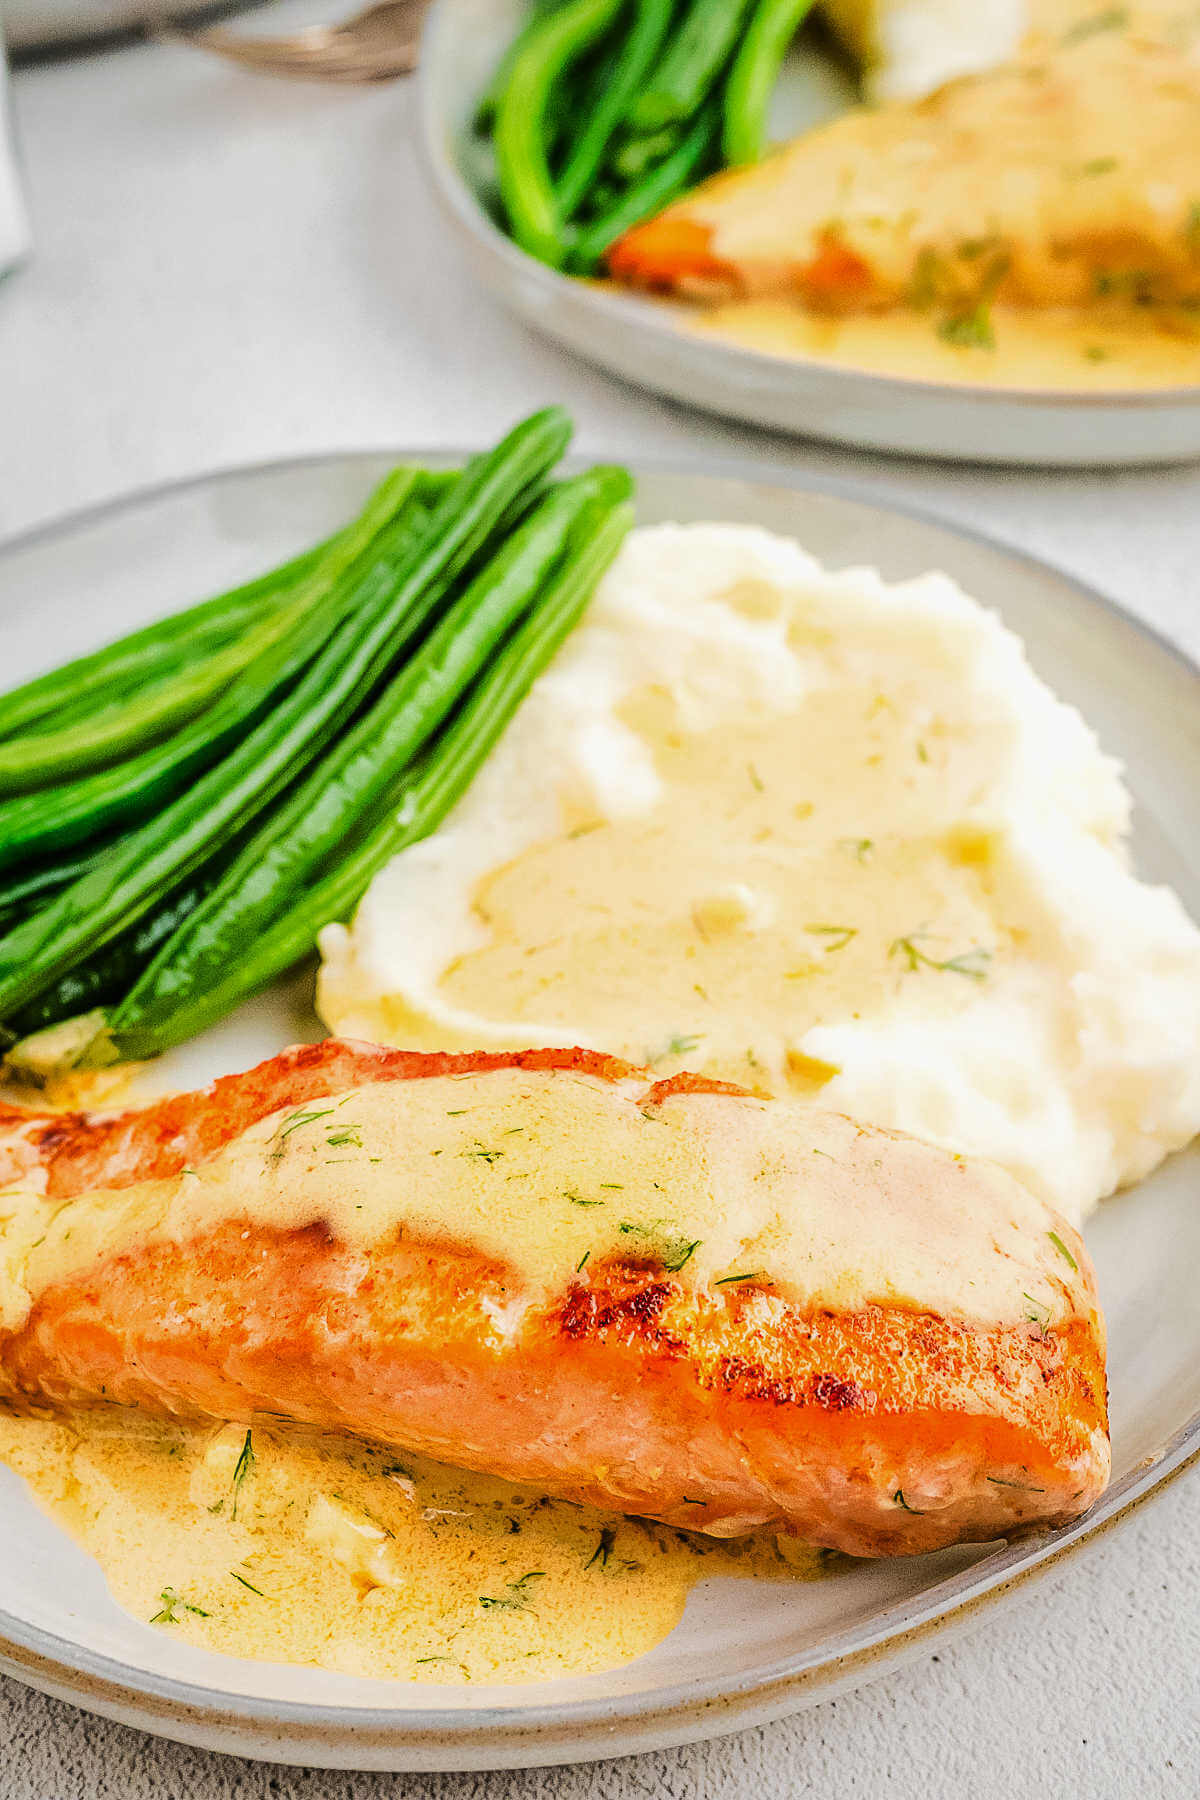 Close up and side view of a salmon filet topped with cream sauce on a plate.